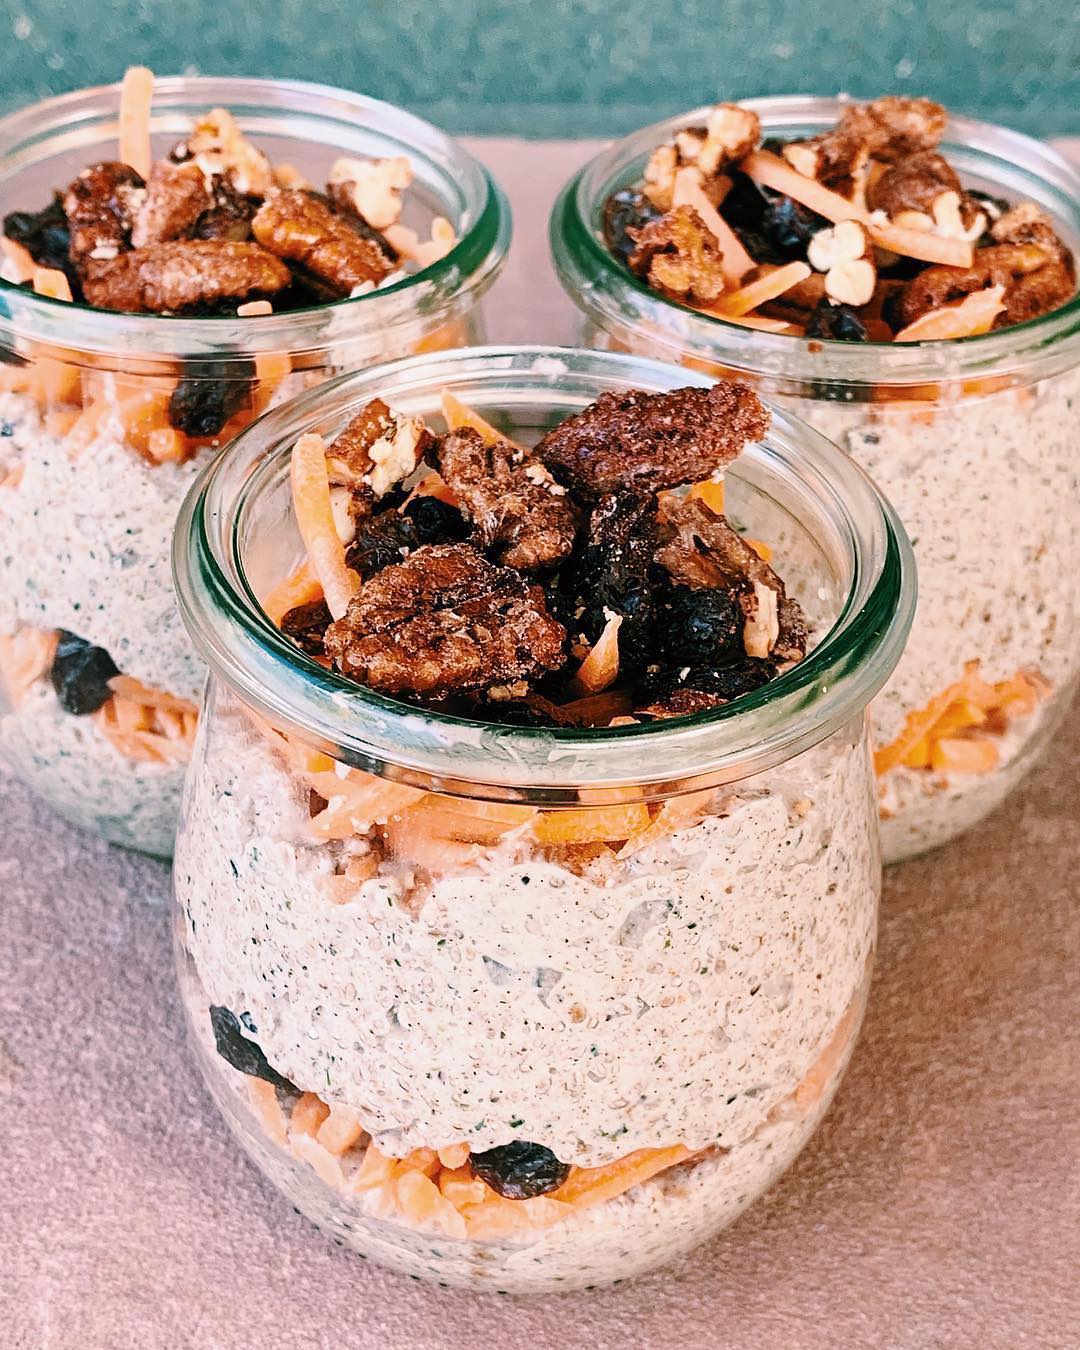 Carrot Cake Chia with Hemp Seed Pudding. Refined Sugar Free, and Vegan